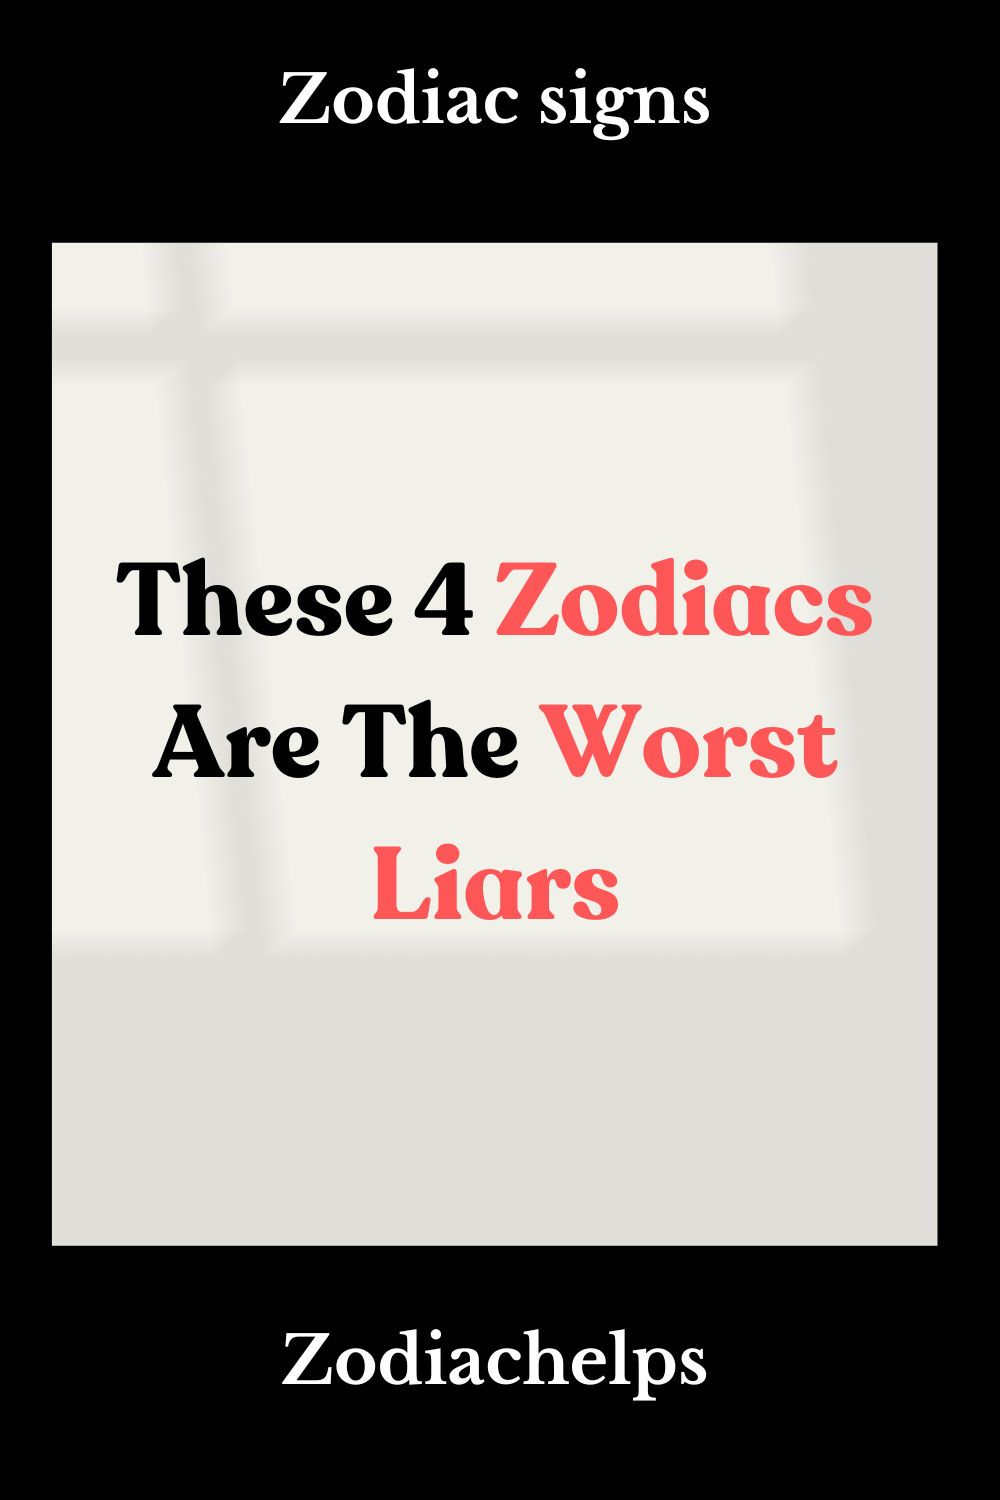 These 4 Zodiacs Are The Worst Liars